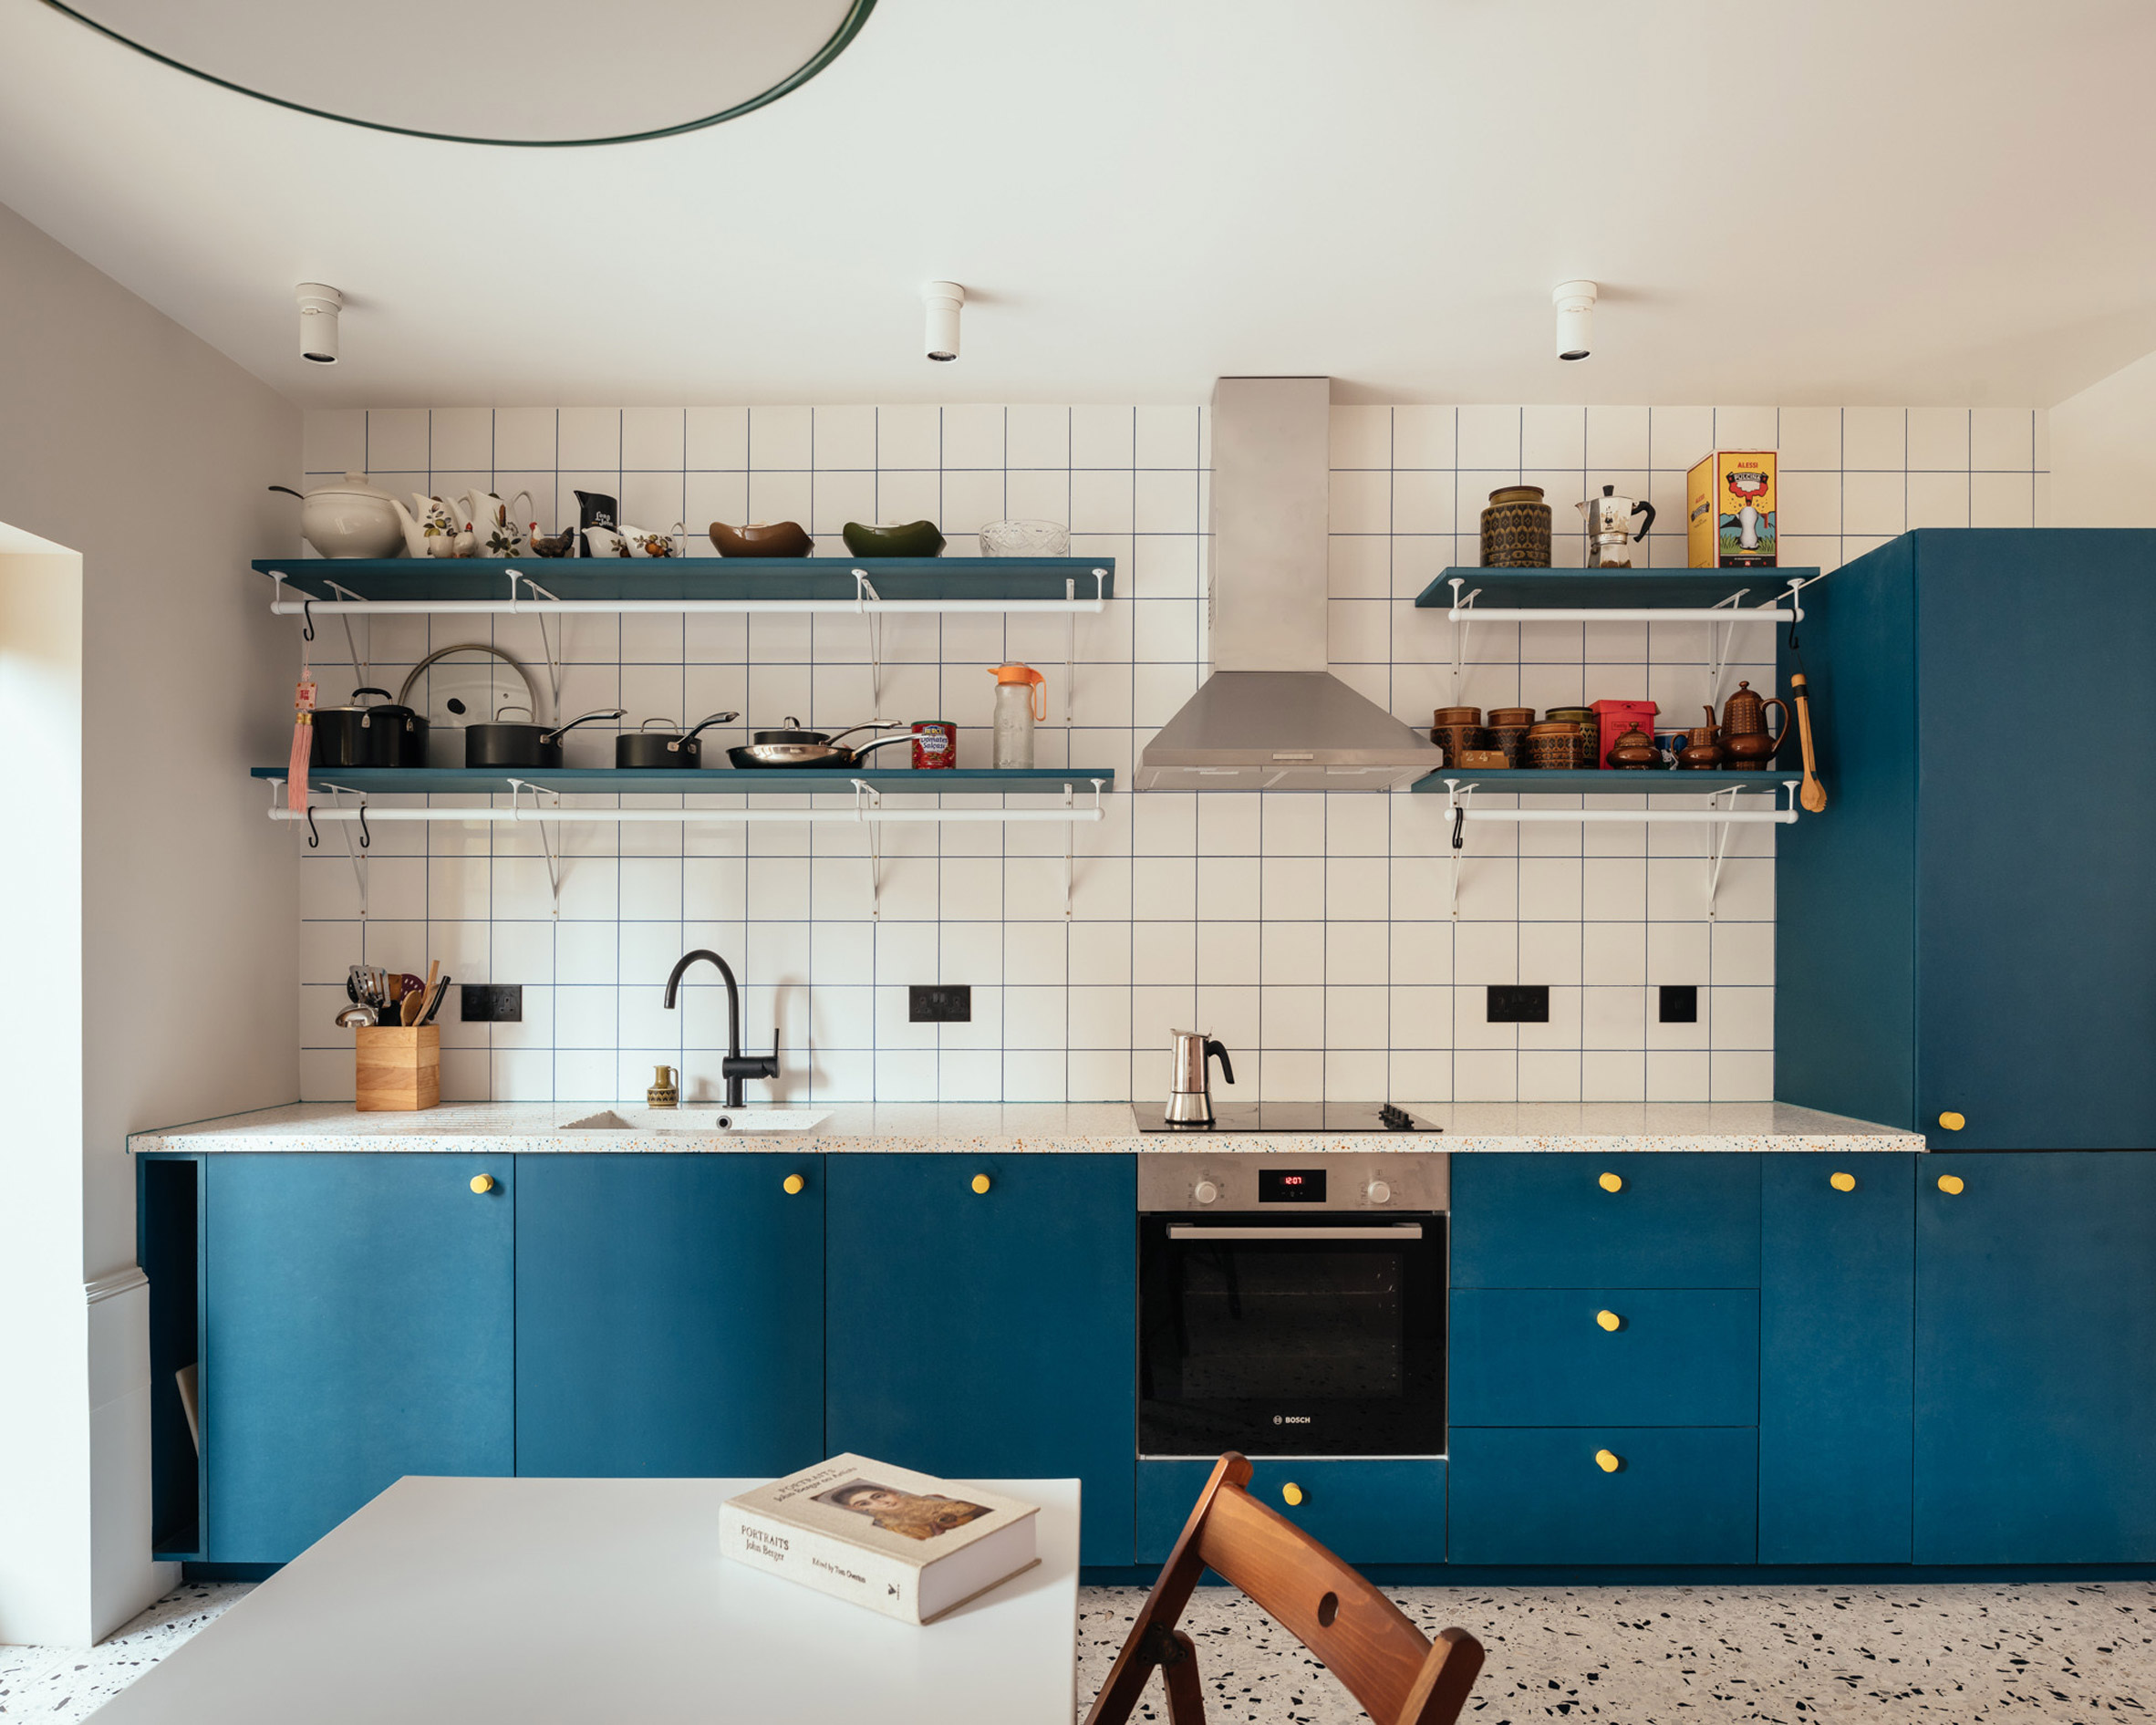 Kitchen with blue units and white tiles